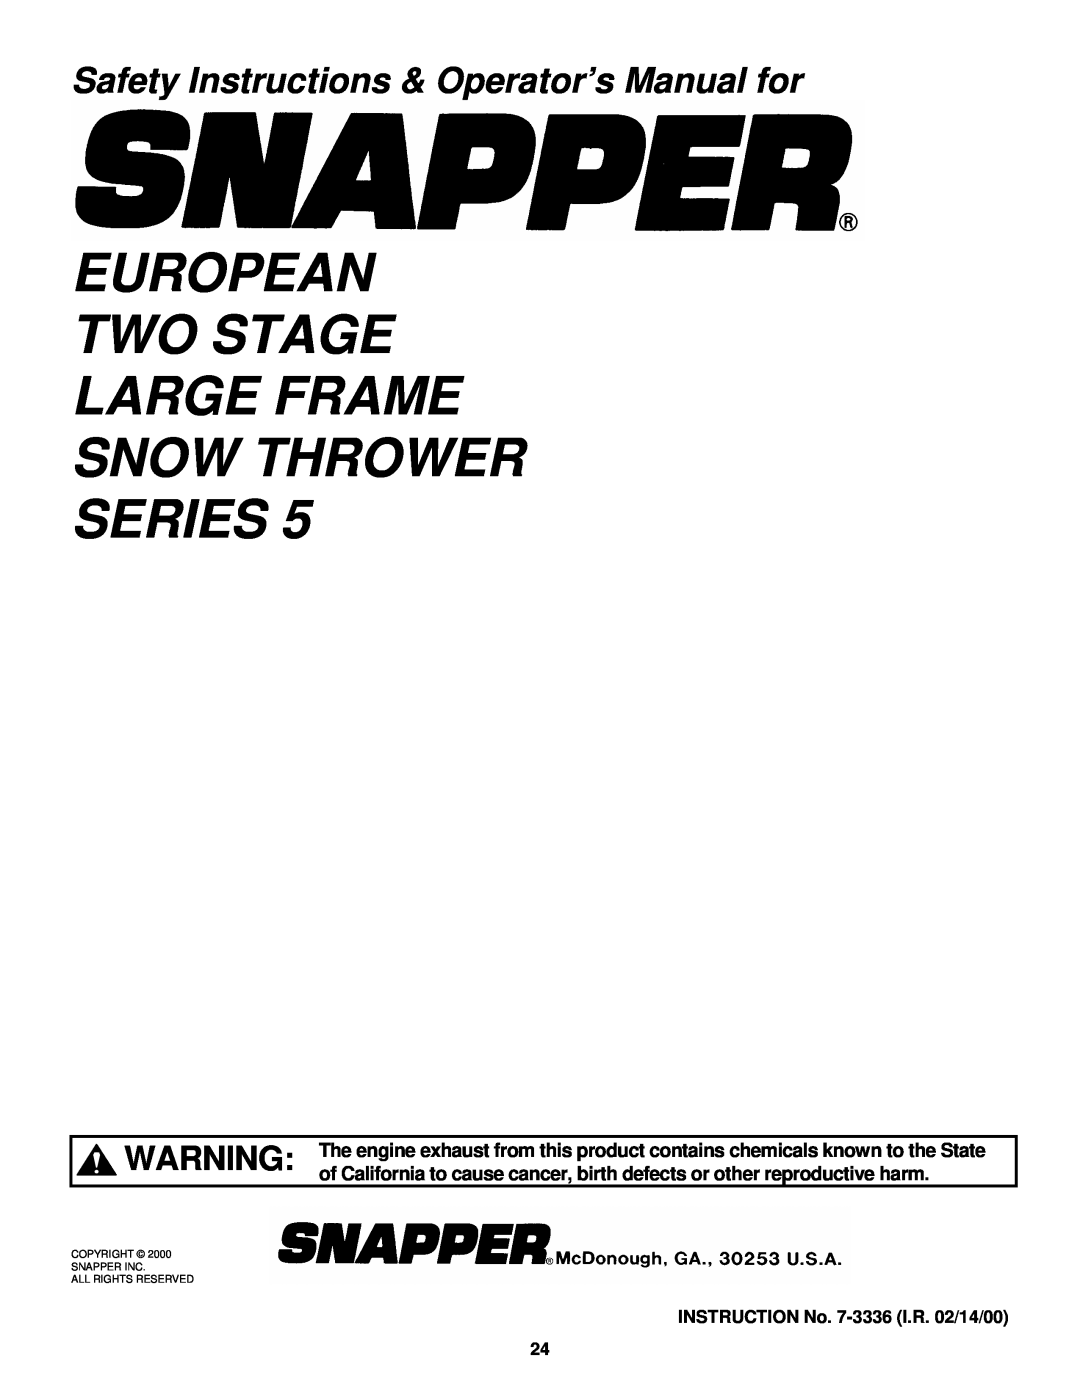 Snapper E9265, E11305 European Two Stage Large Frame Snow Thrower, Series, Safety Instructions & Operator’s Manual for 